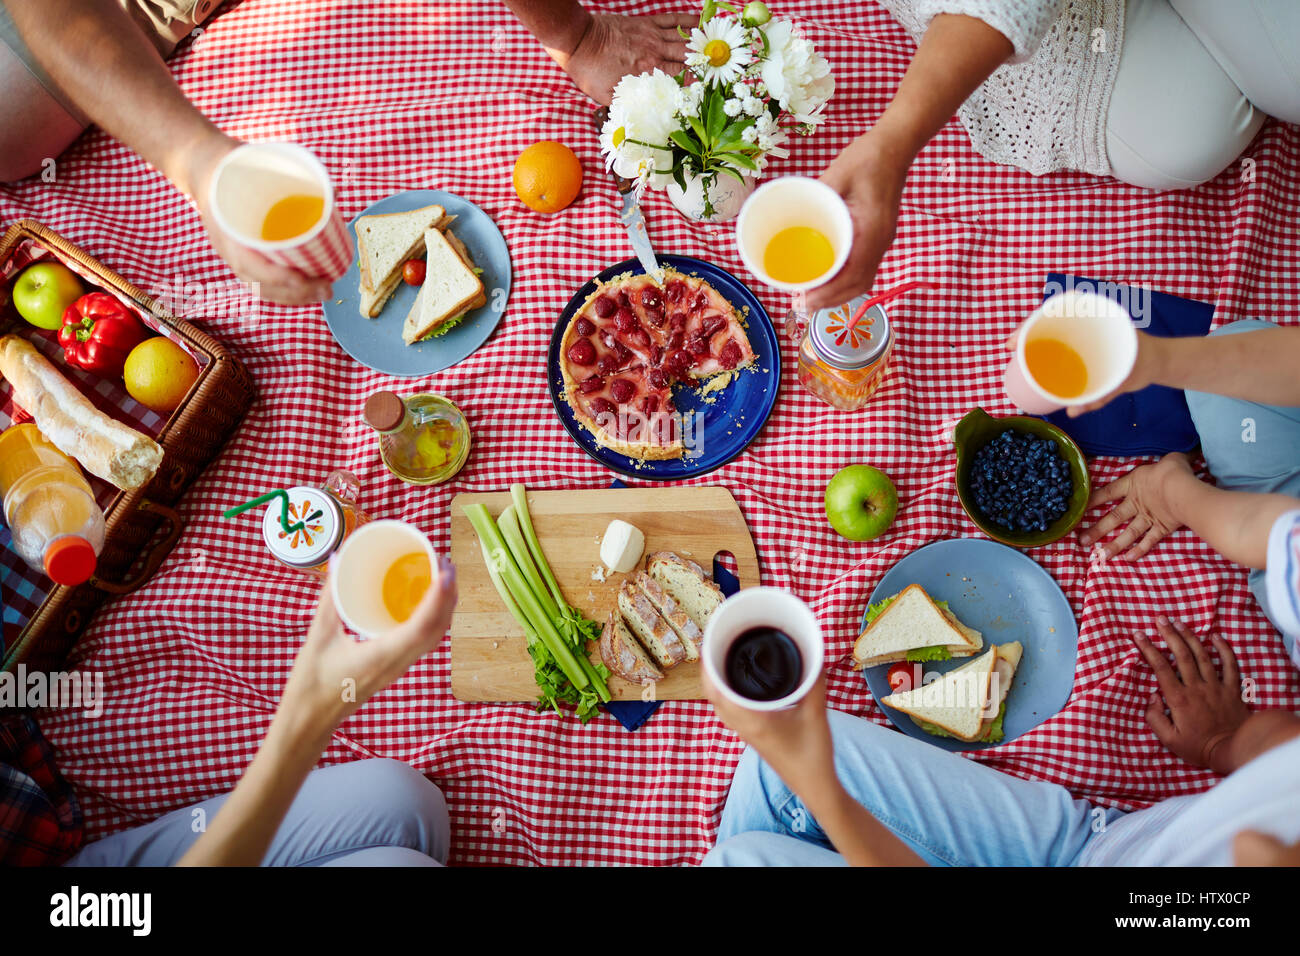 Picnic blanket with healthy food and human hands with drinks over it Stock Photo